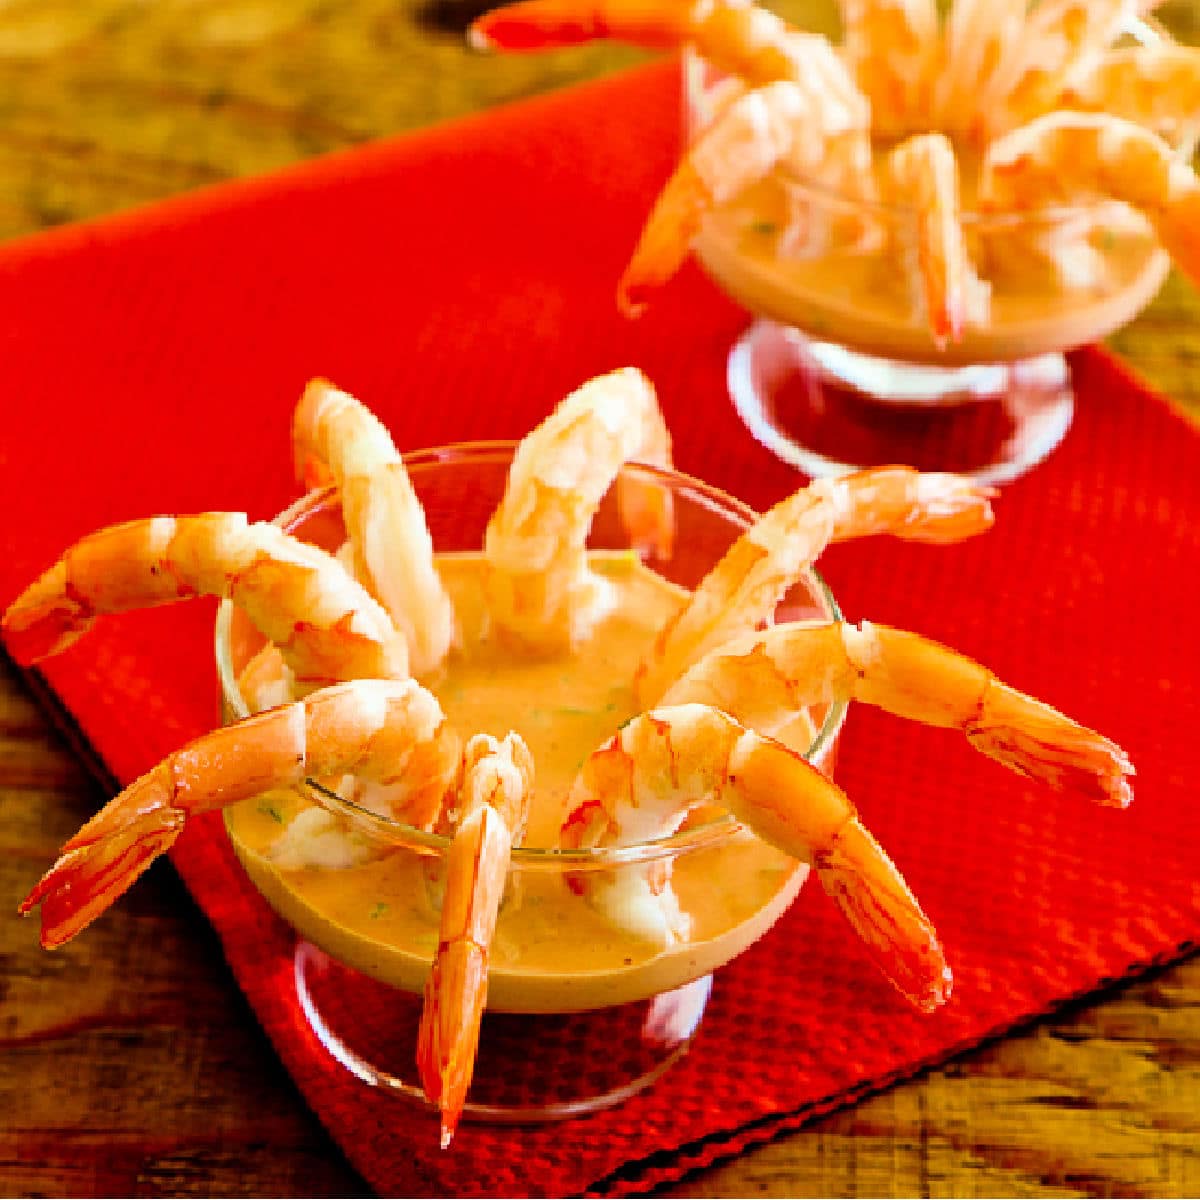 Shrimp Cocktail with Sriracha Cocktail Sauce shown in two cocktail glasses on red napkin.